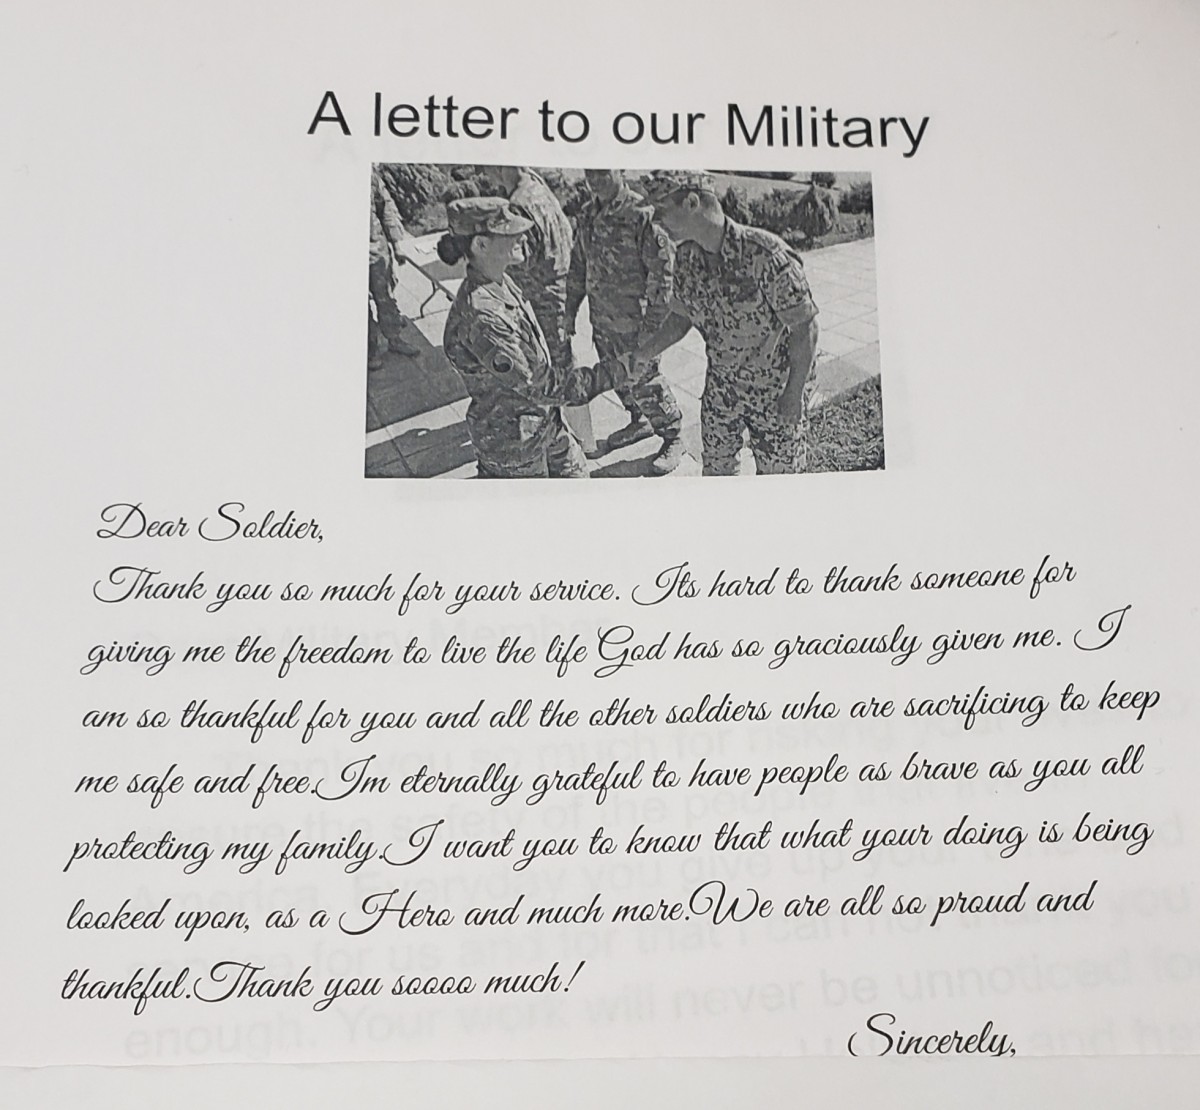 Letter to a member of the military from an 8th grade scholar at Heritage Middle School.